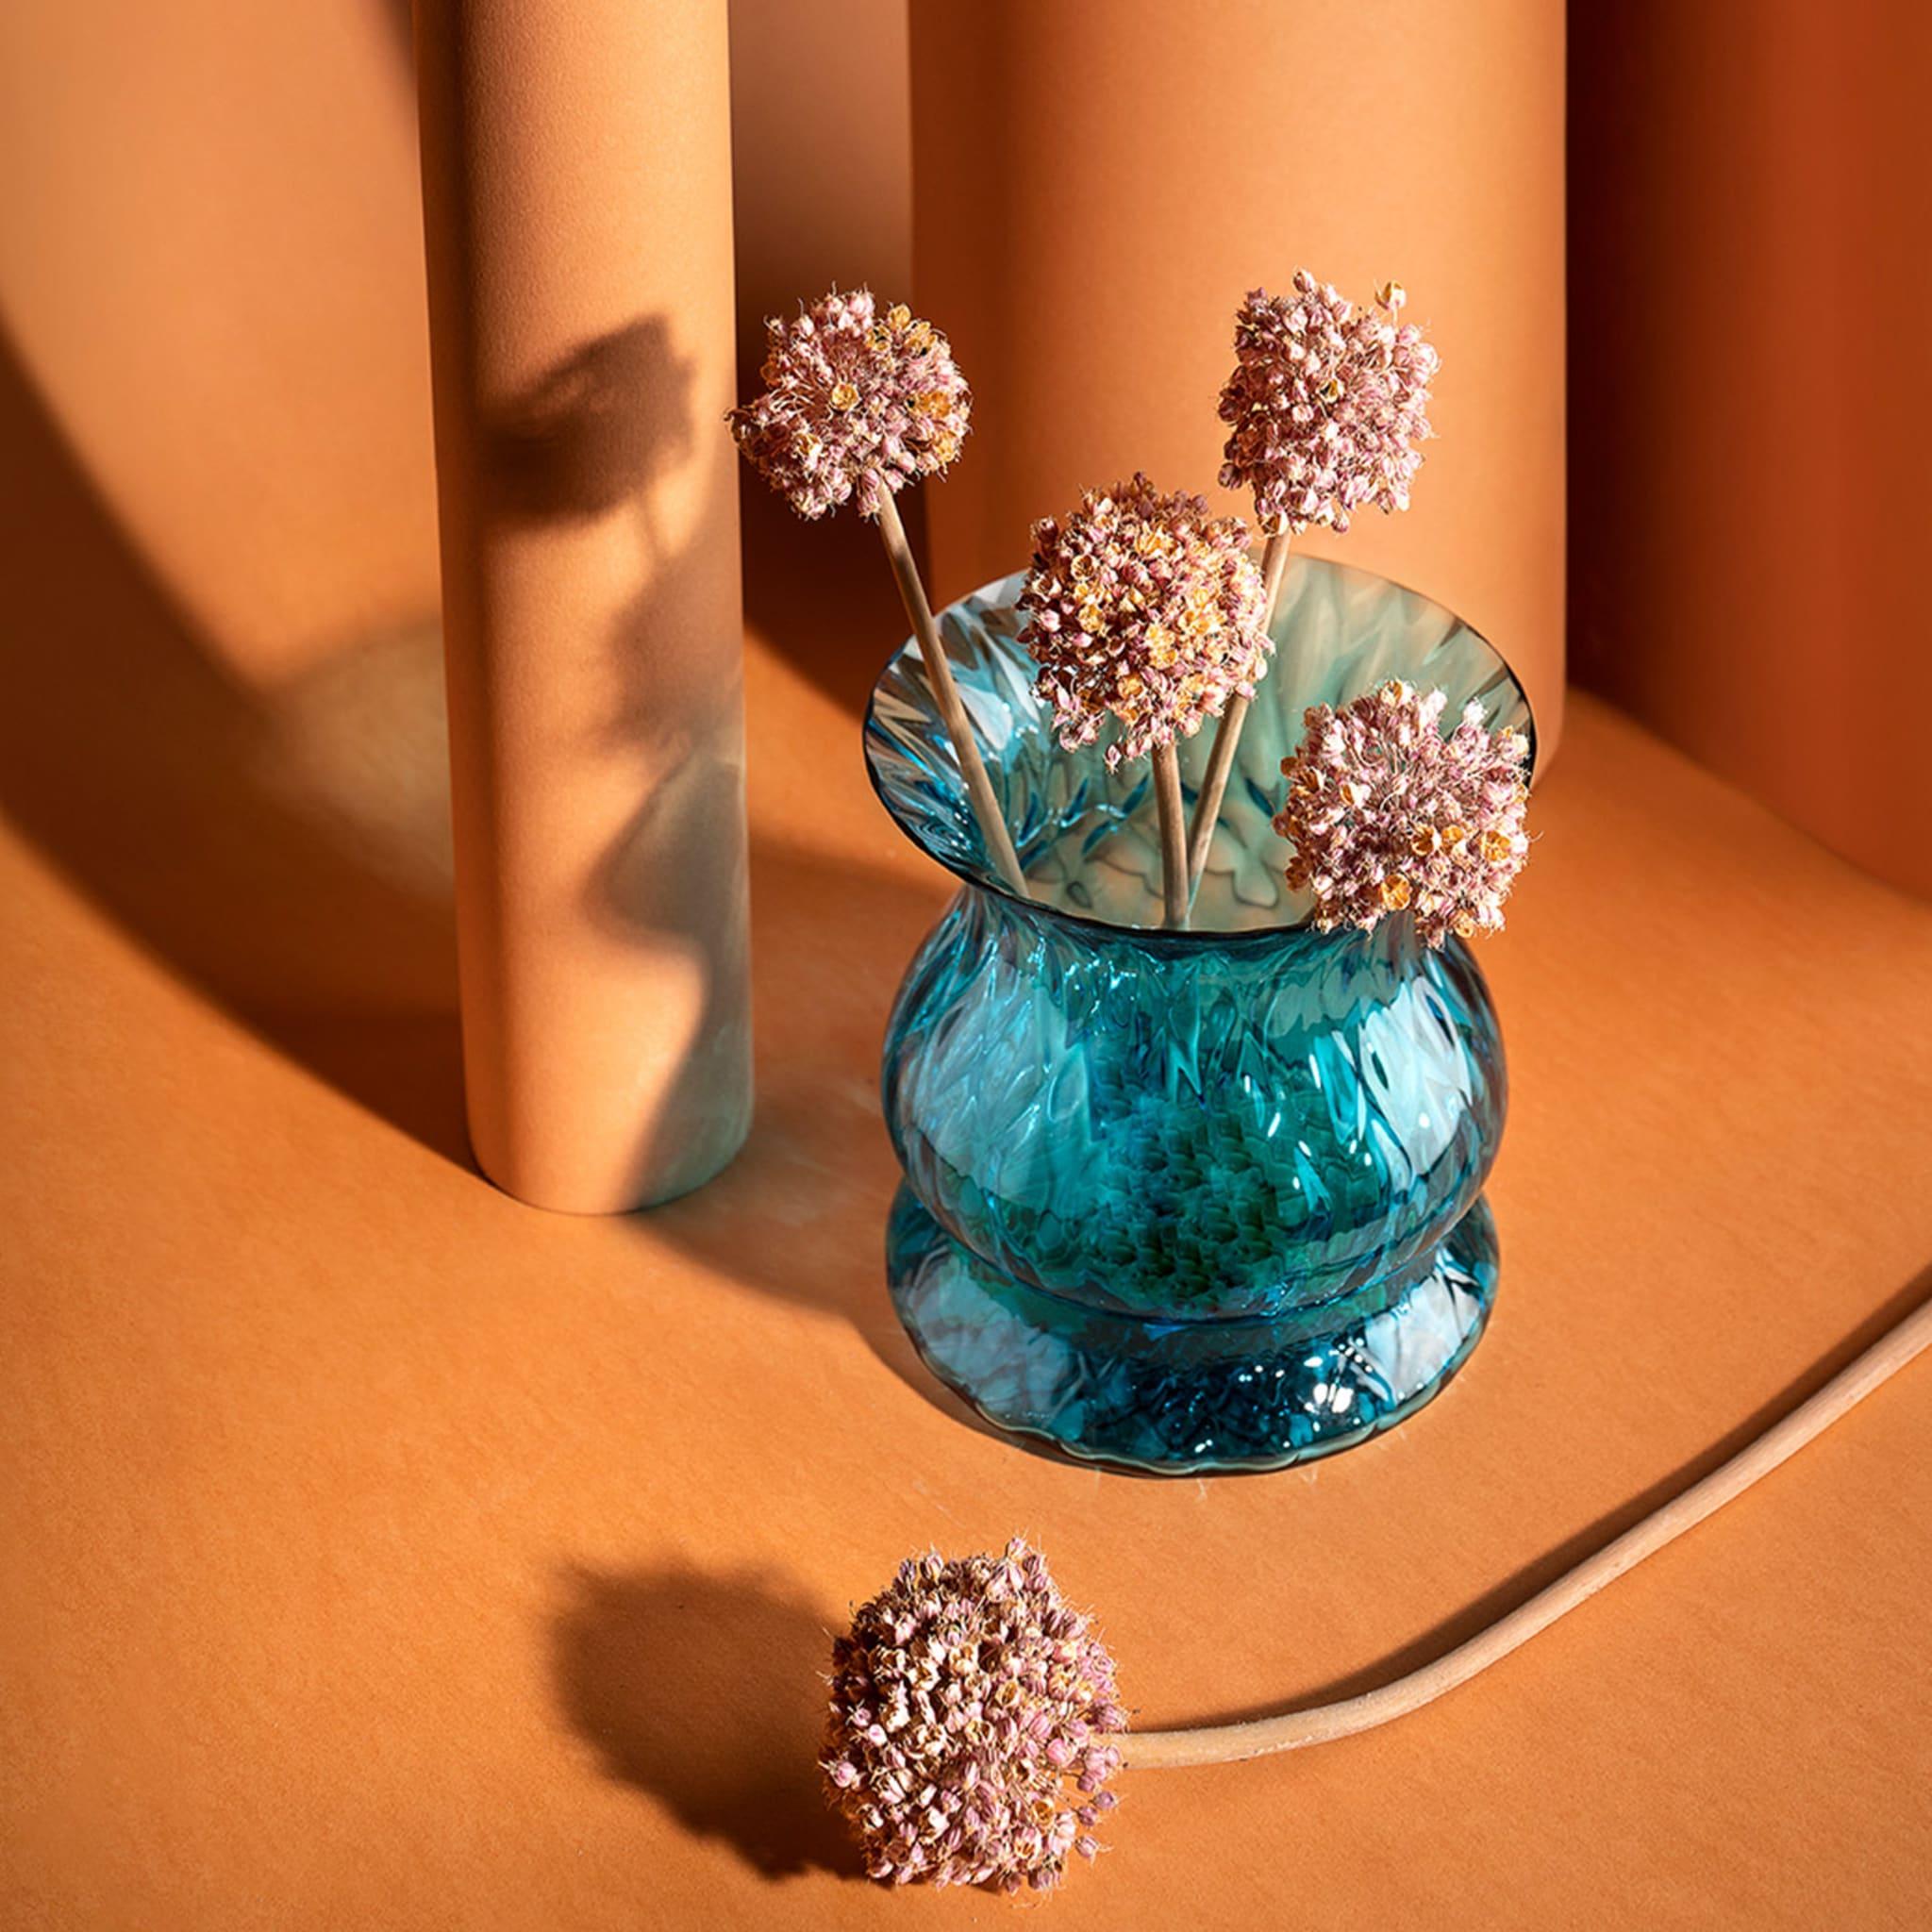 The intense cerulean blue Murano glass creates a magnetic vase with accentuated relief of macramé techniques. A Venetian signature style that everyone loves. The artistic glass is embellished with a particular texture that gives the surface a